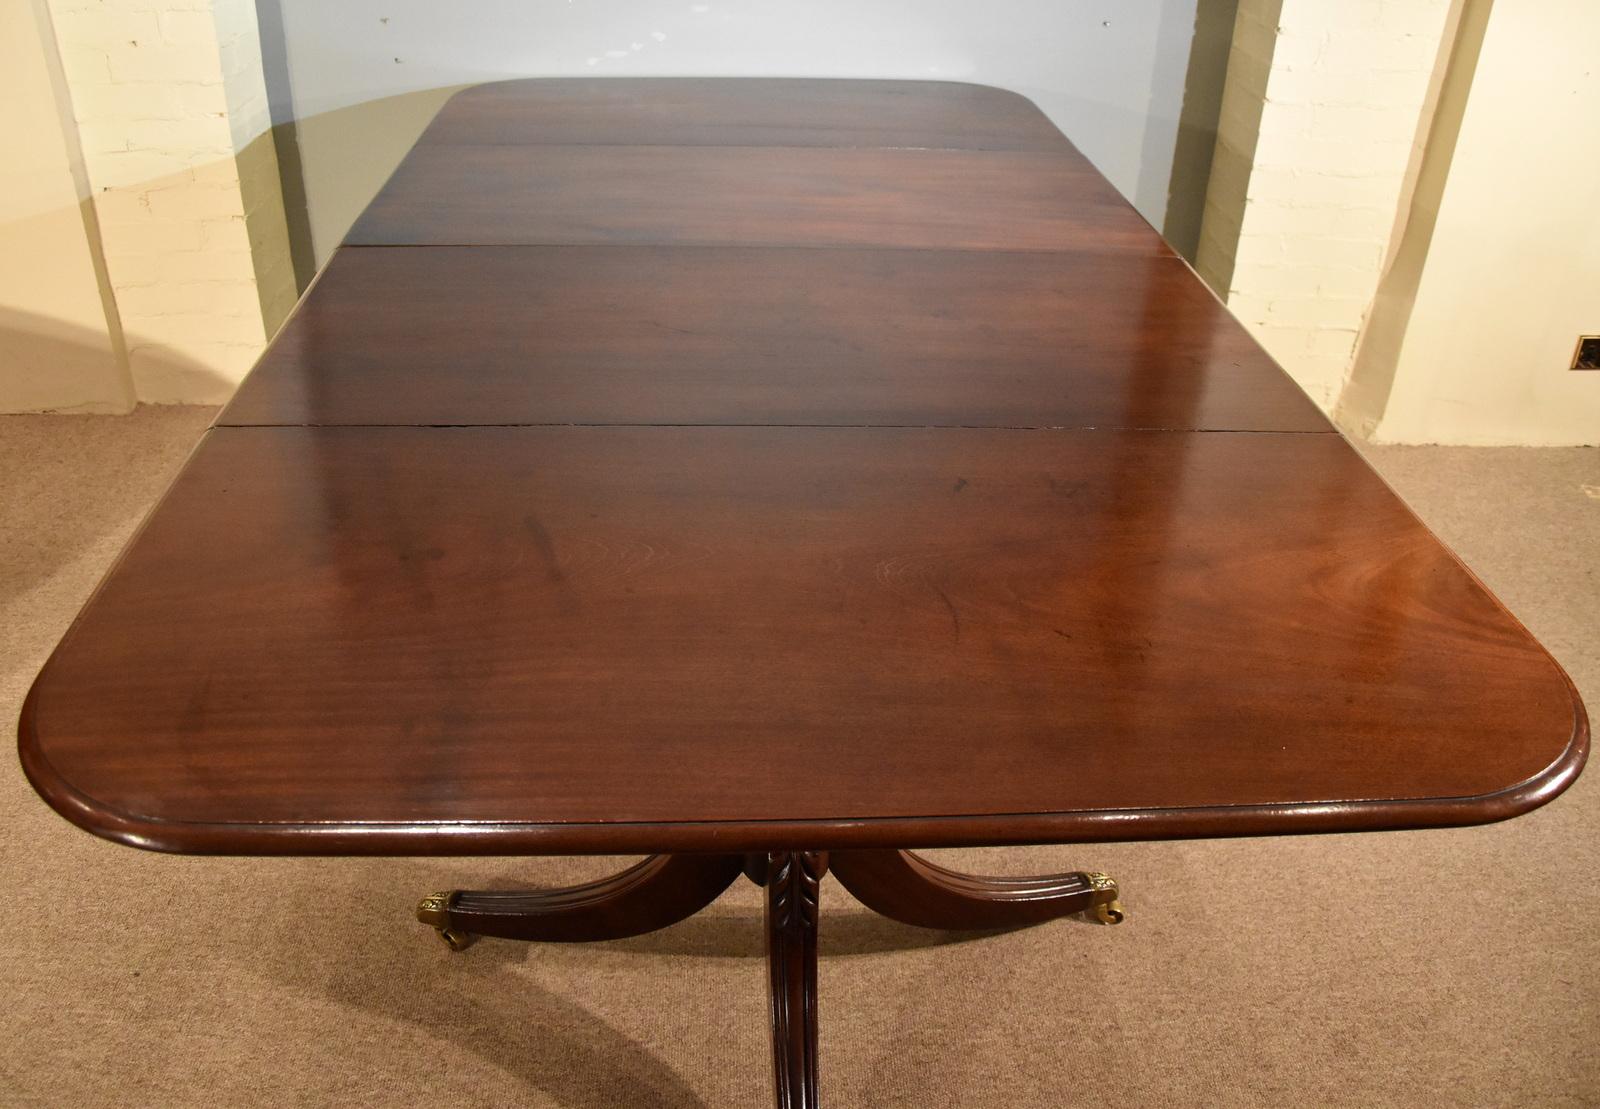 A superb regency two pillar dining table with one later leaf. Two pillar dining tables were only made with one leaf. So bars were introduced to make it possible for two leaves. 

Dimensions
Height 28.5